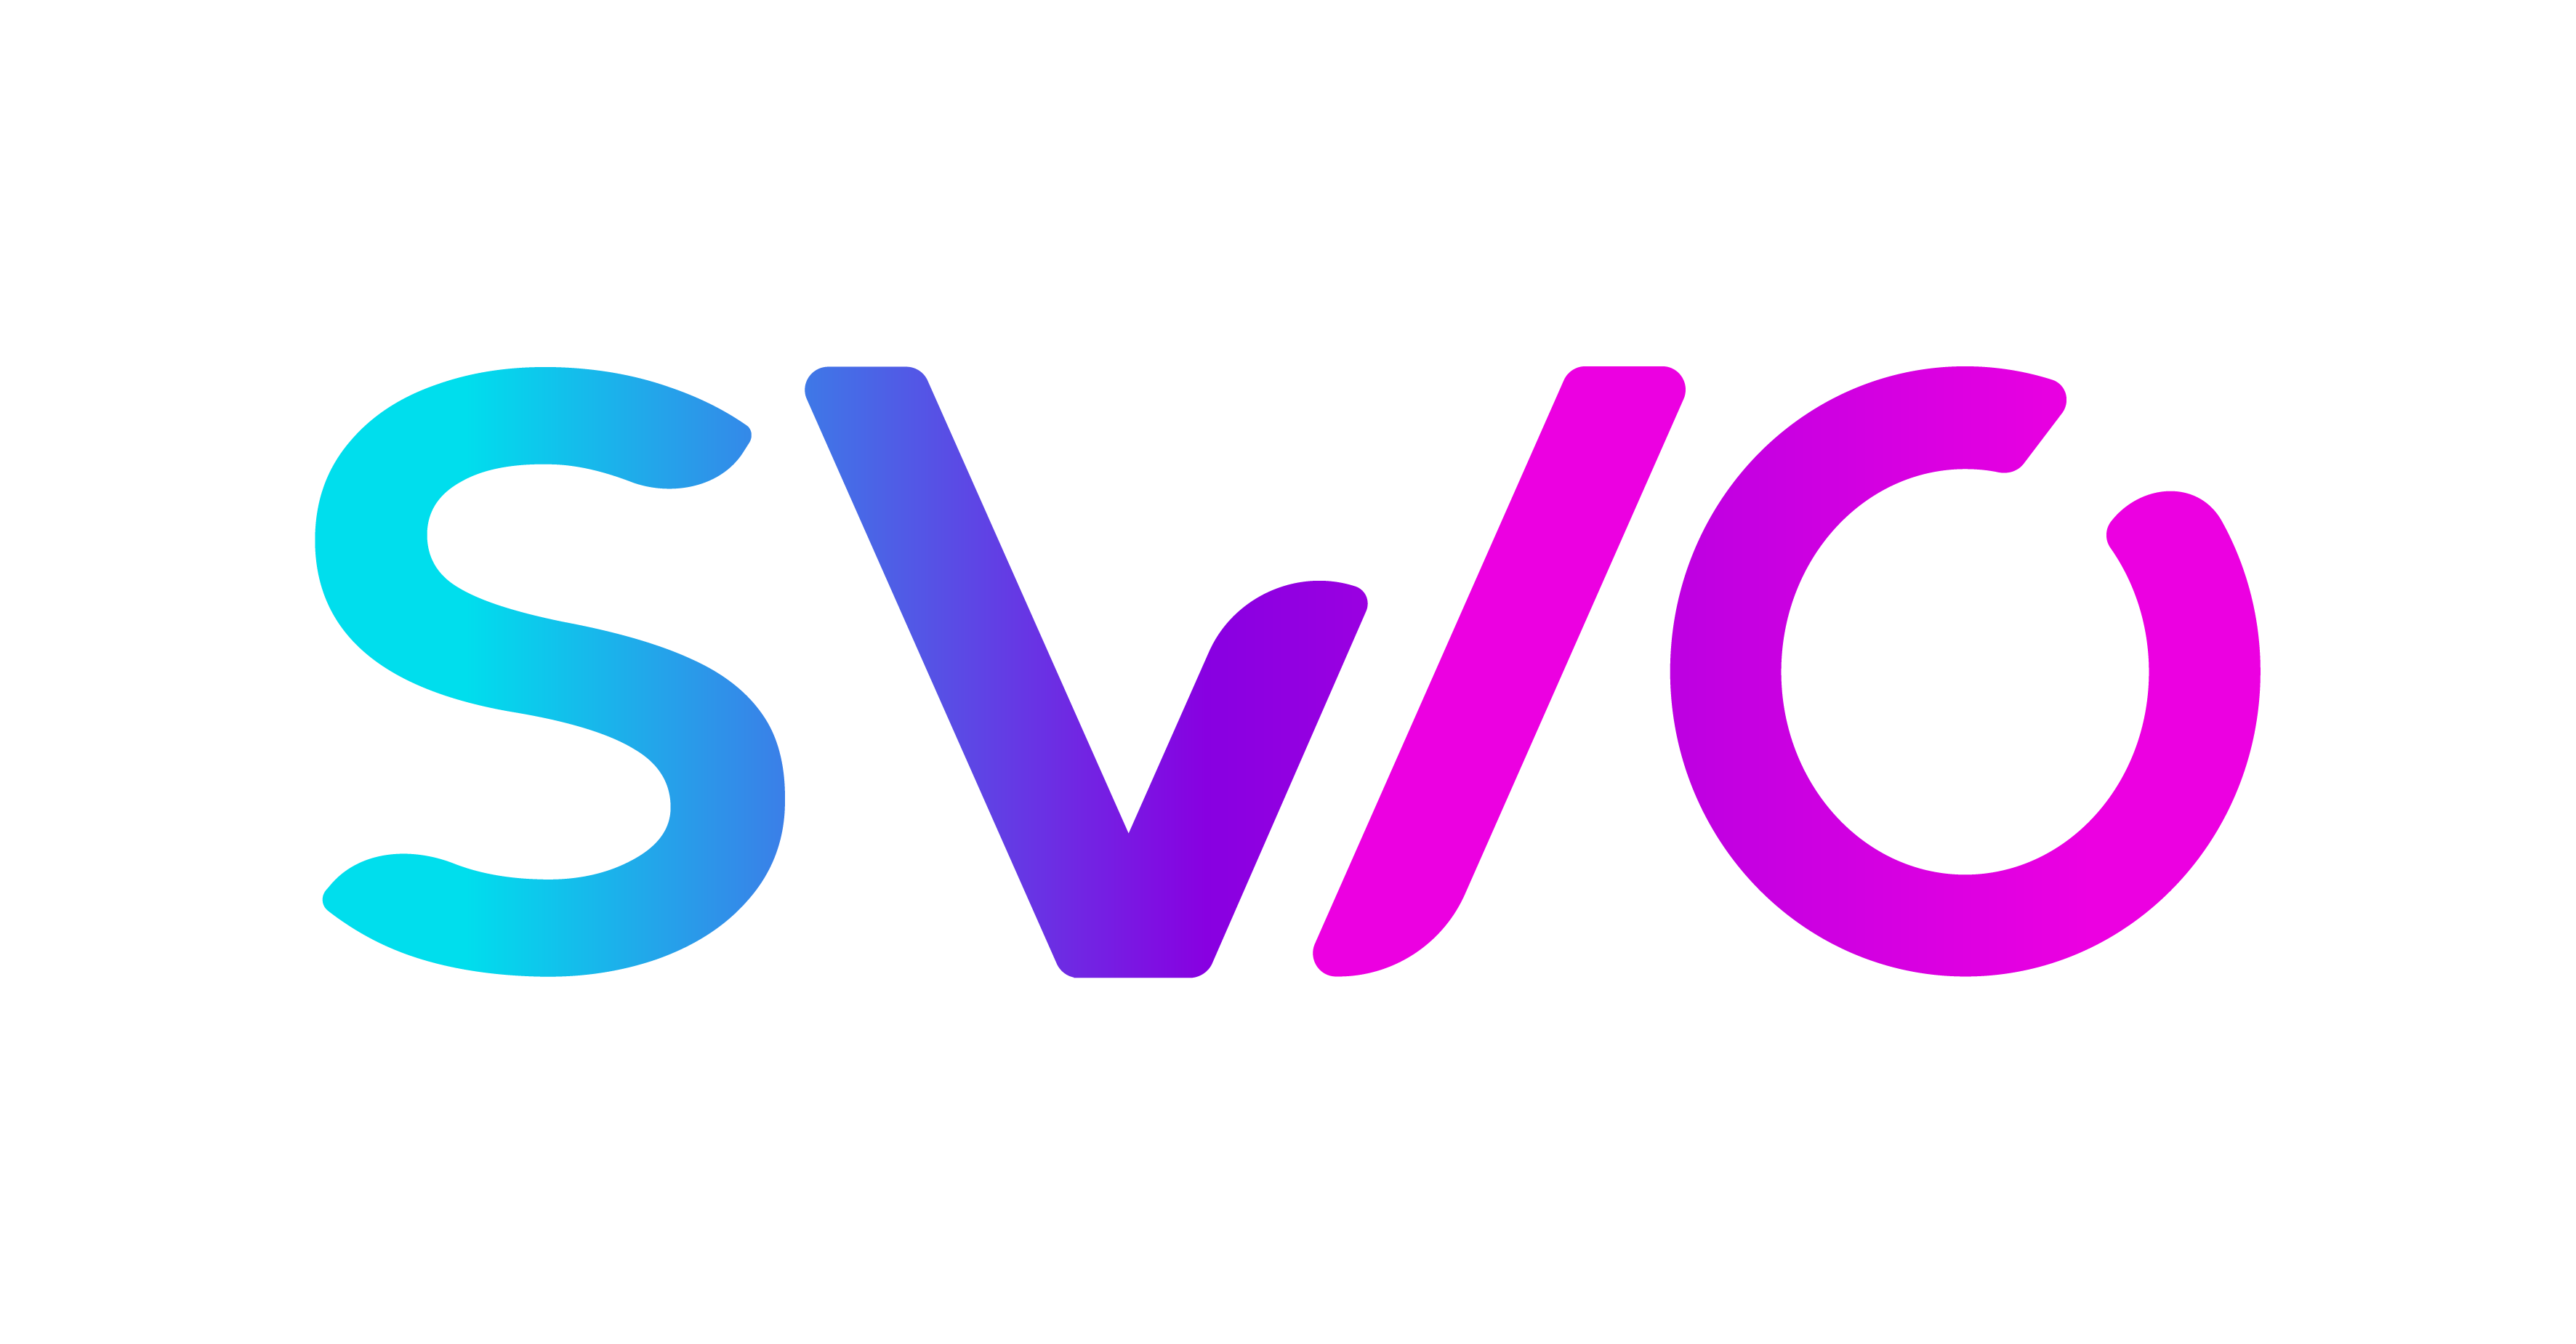 SWIO - Charging Management Solution for your electric or plug-in hybrid vehicle